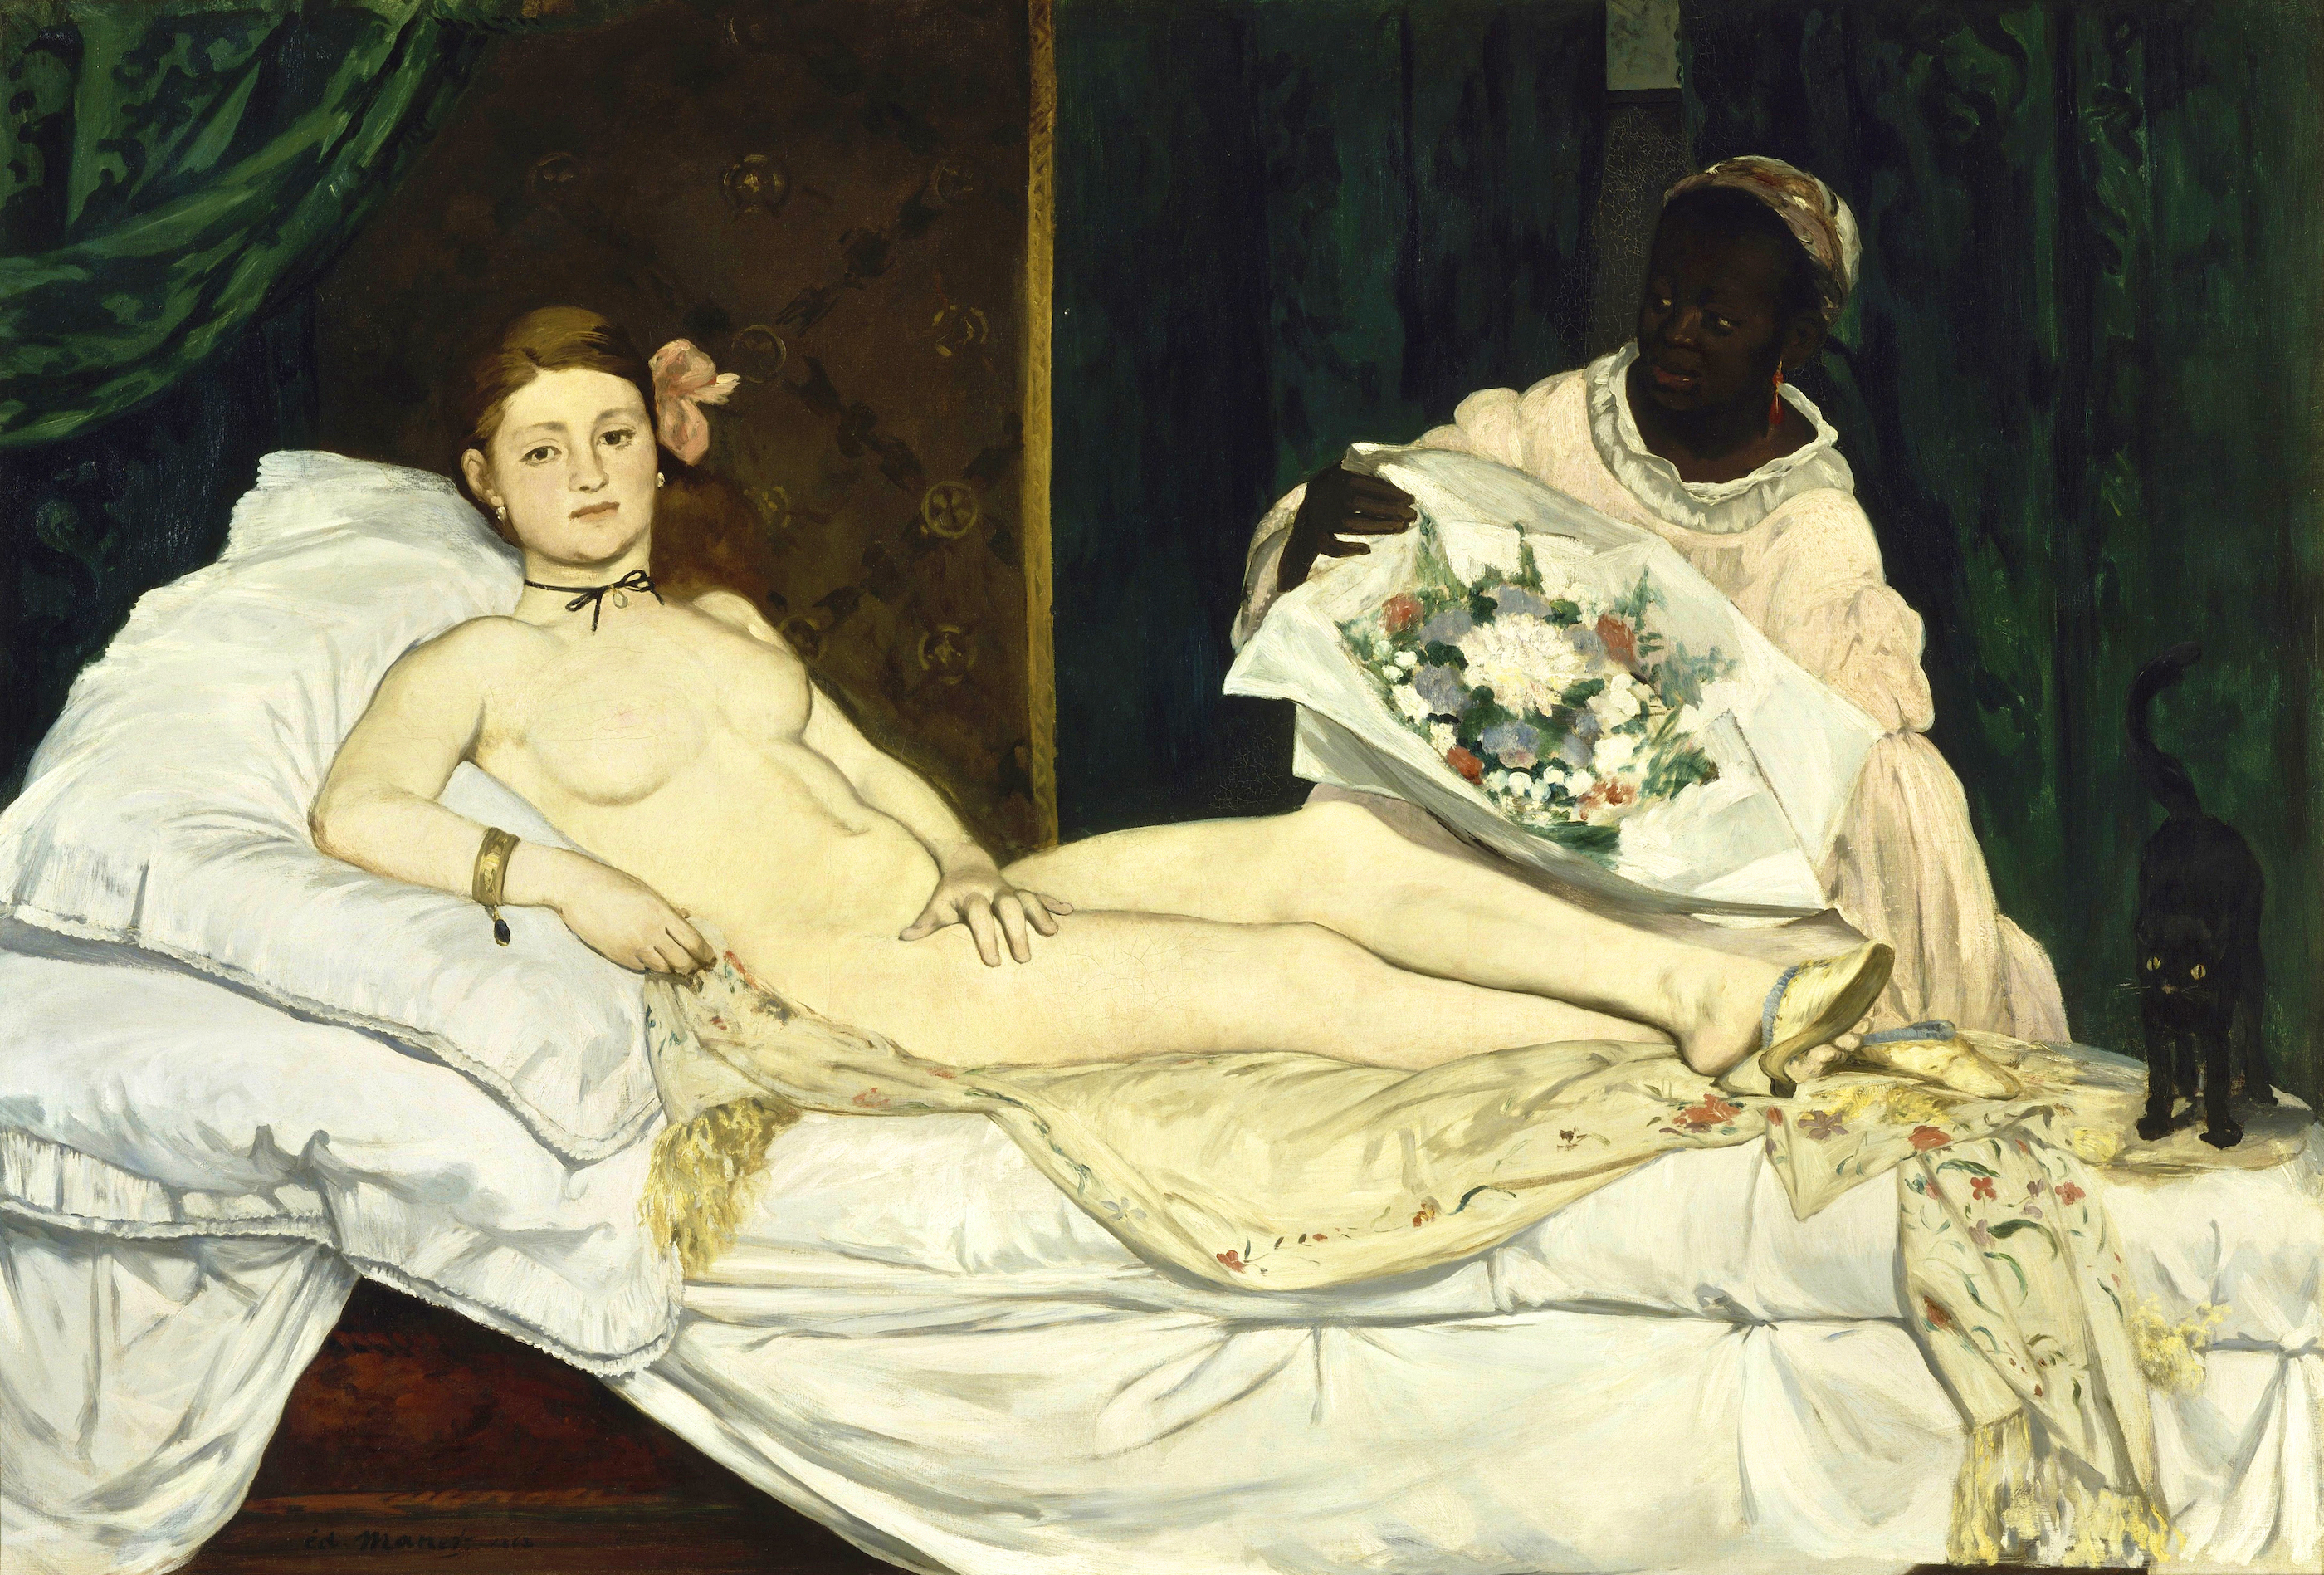 Olimpia by Édouard Manet - 1863 - 130 x 190 cm Musée d'Orsay